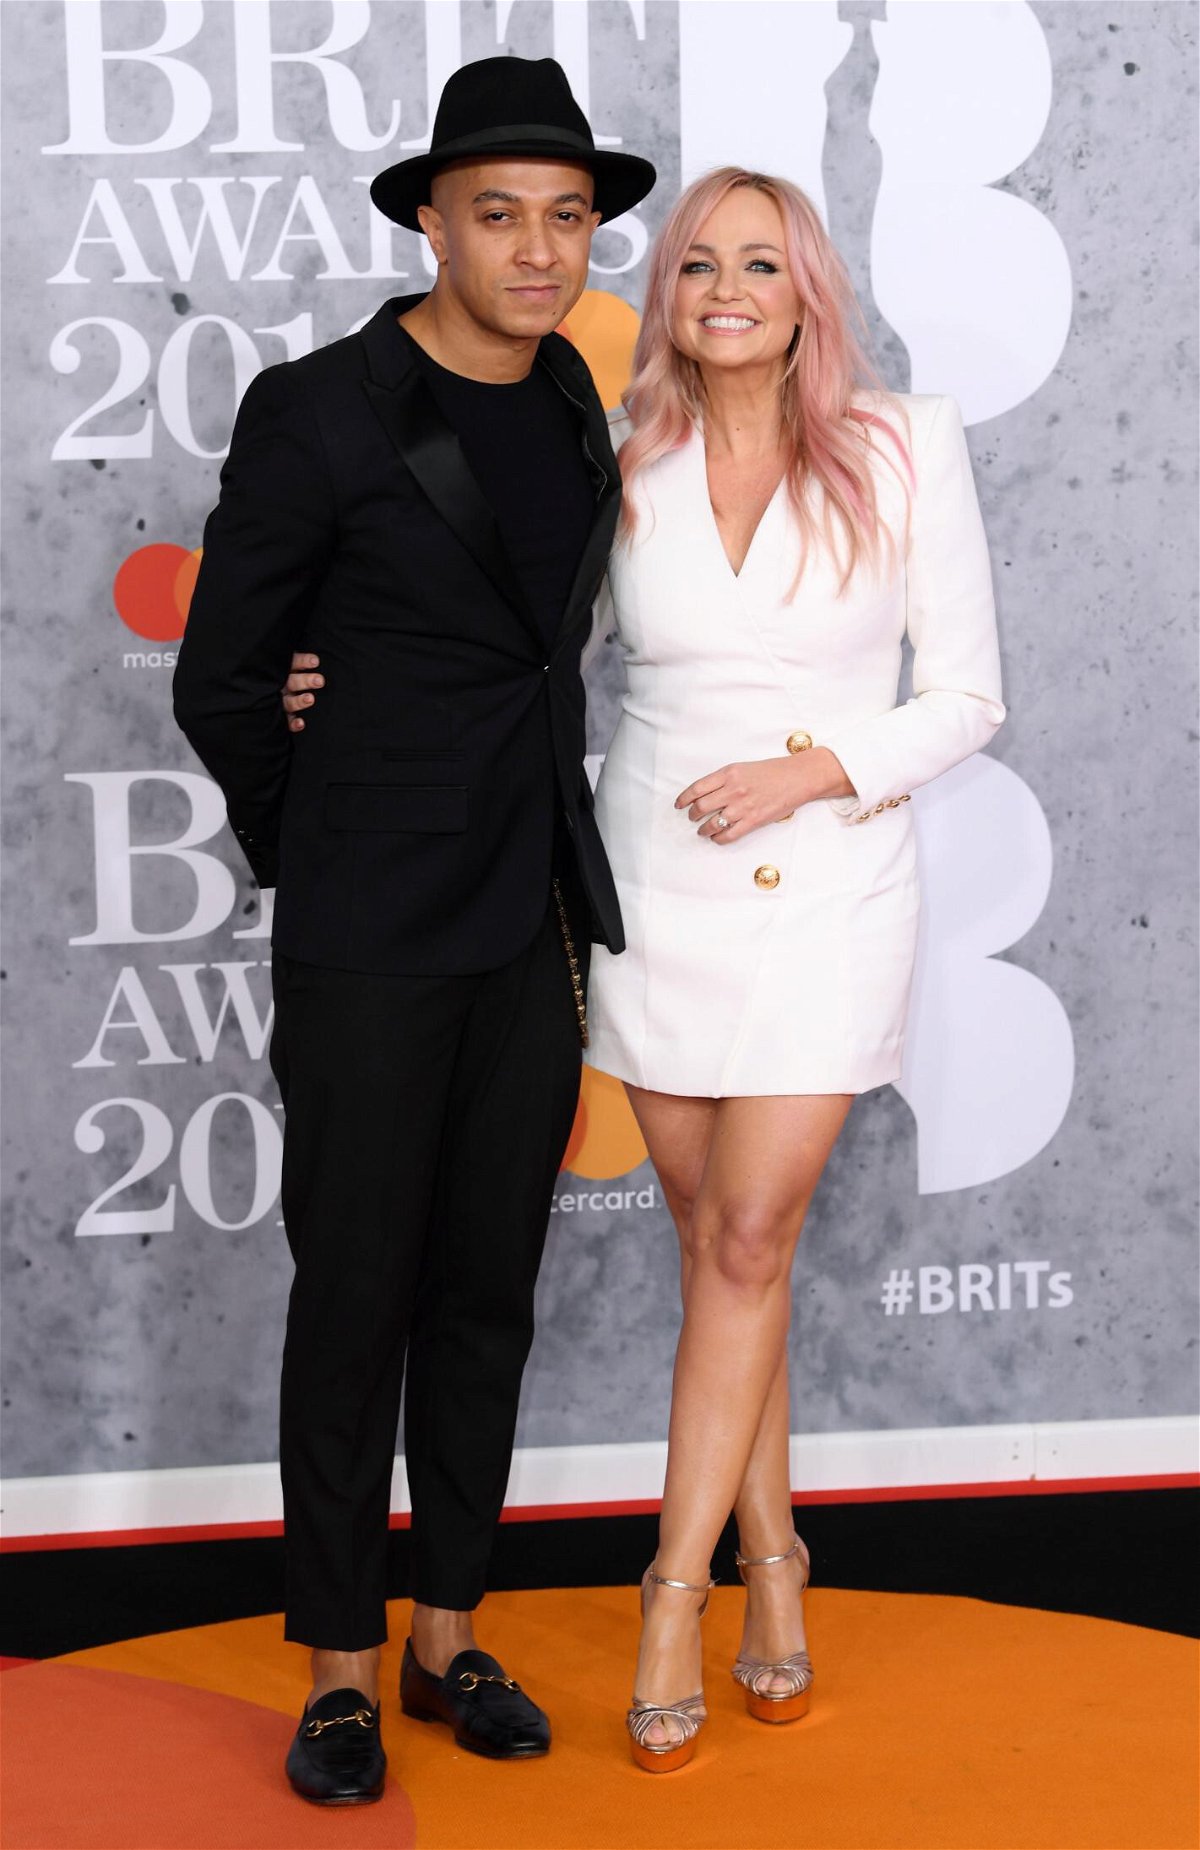 <i>David Fisher/Shutterstock</i><br/>Jade Jones and Bunton are shown at the Brit Awards in 2019. Former Spice Girl Emma Bunton has married her long-time partner